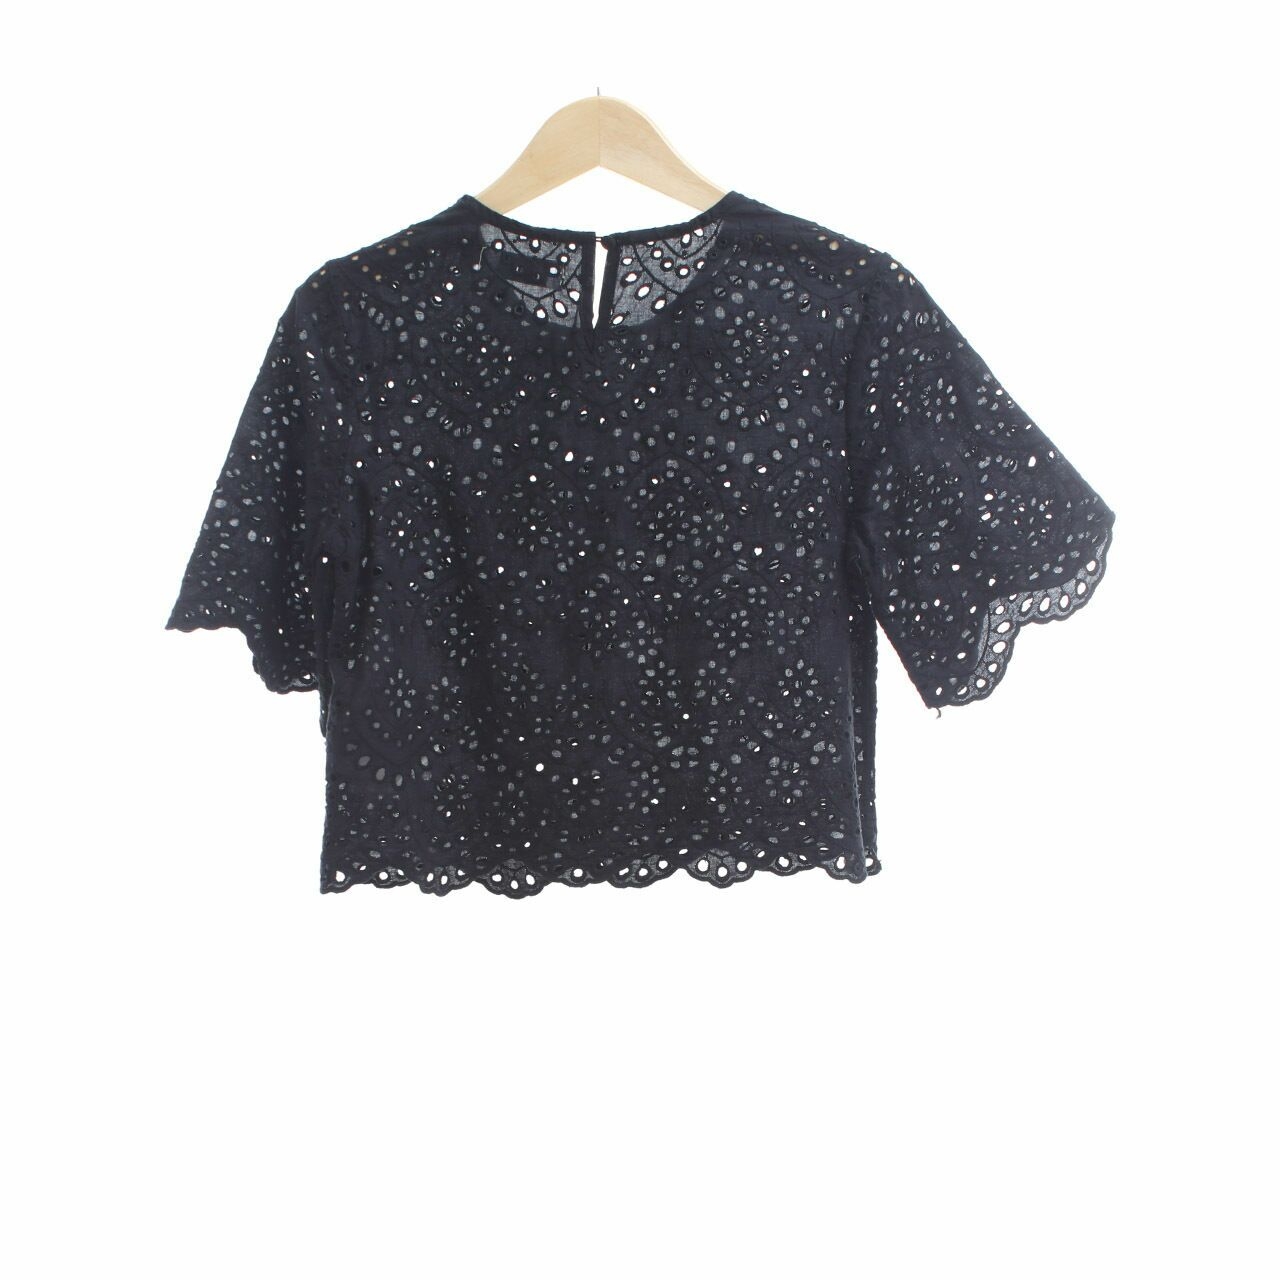 The Editor's Market Black Perforated Blouse